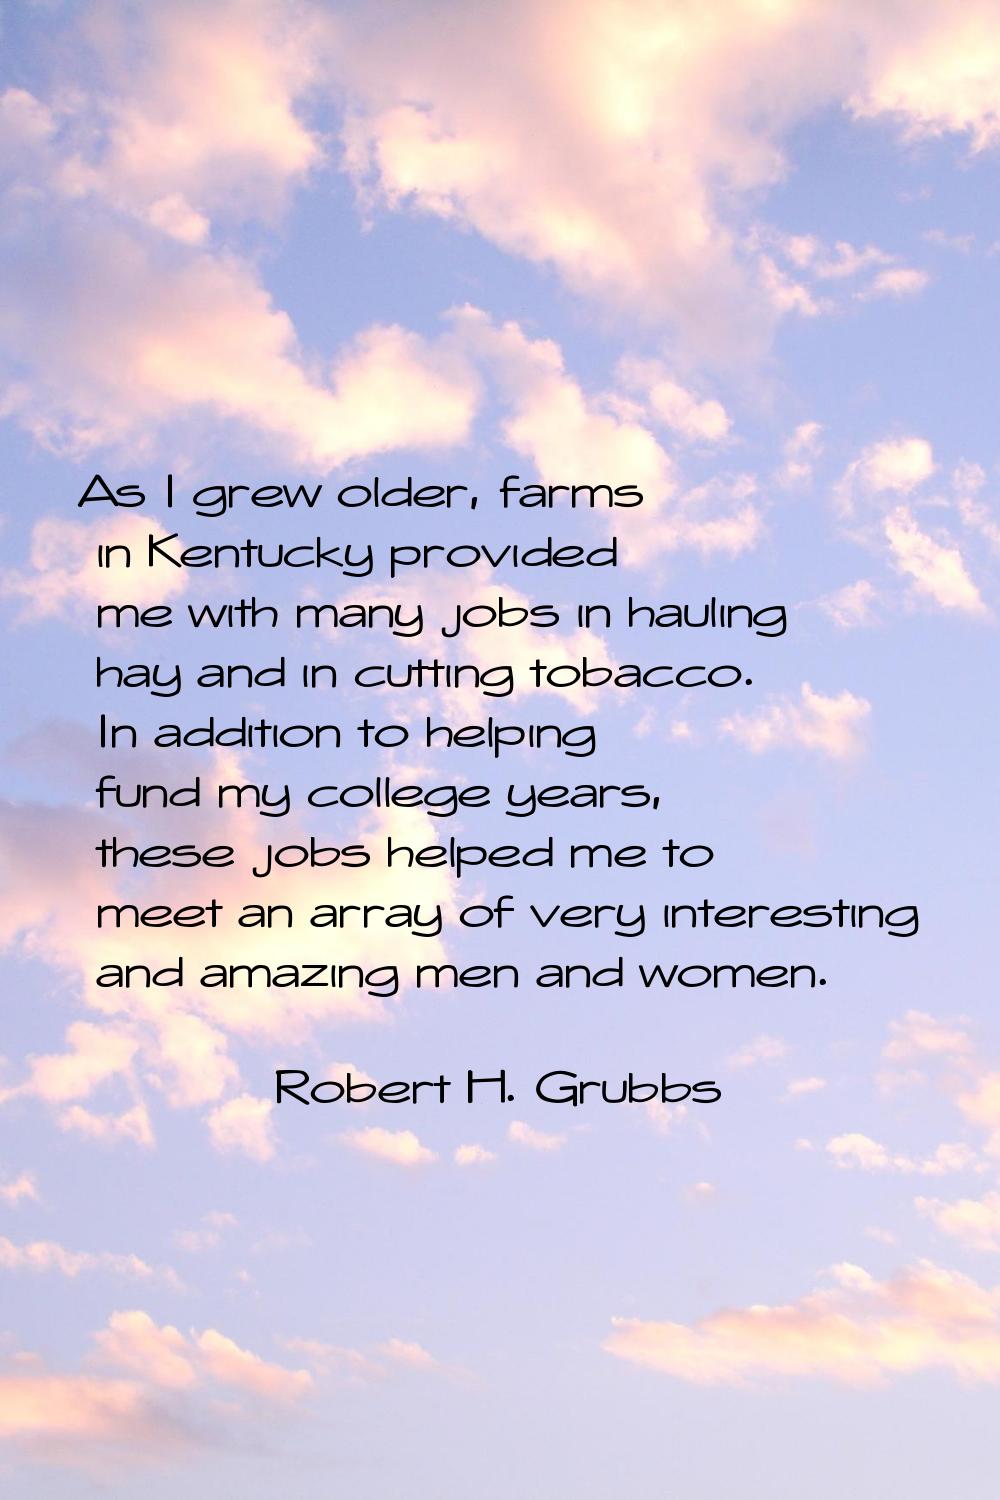 As I grew older, farms in Kentucky provided me with many jobs in hauling hay and in cutting tobacco